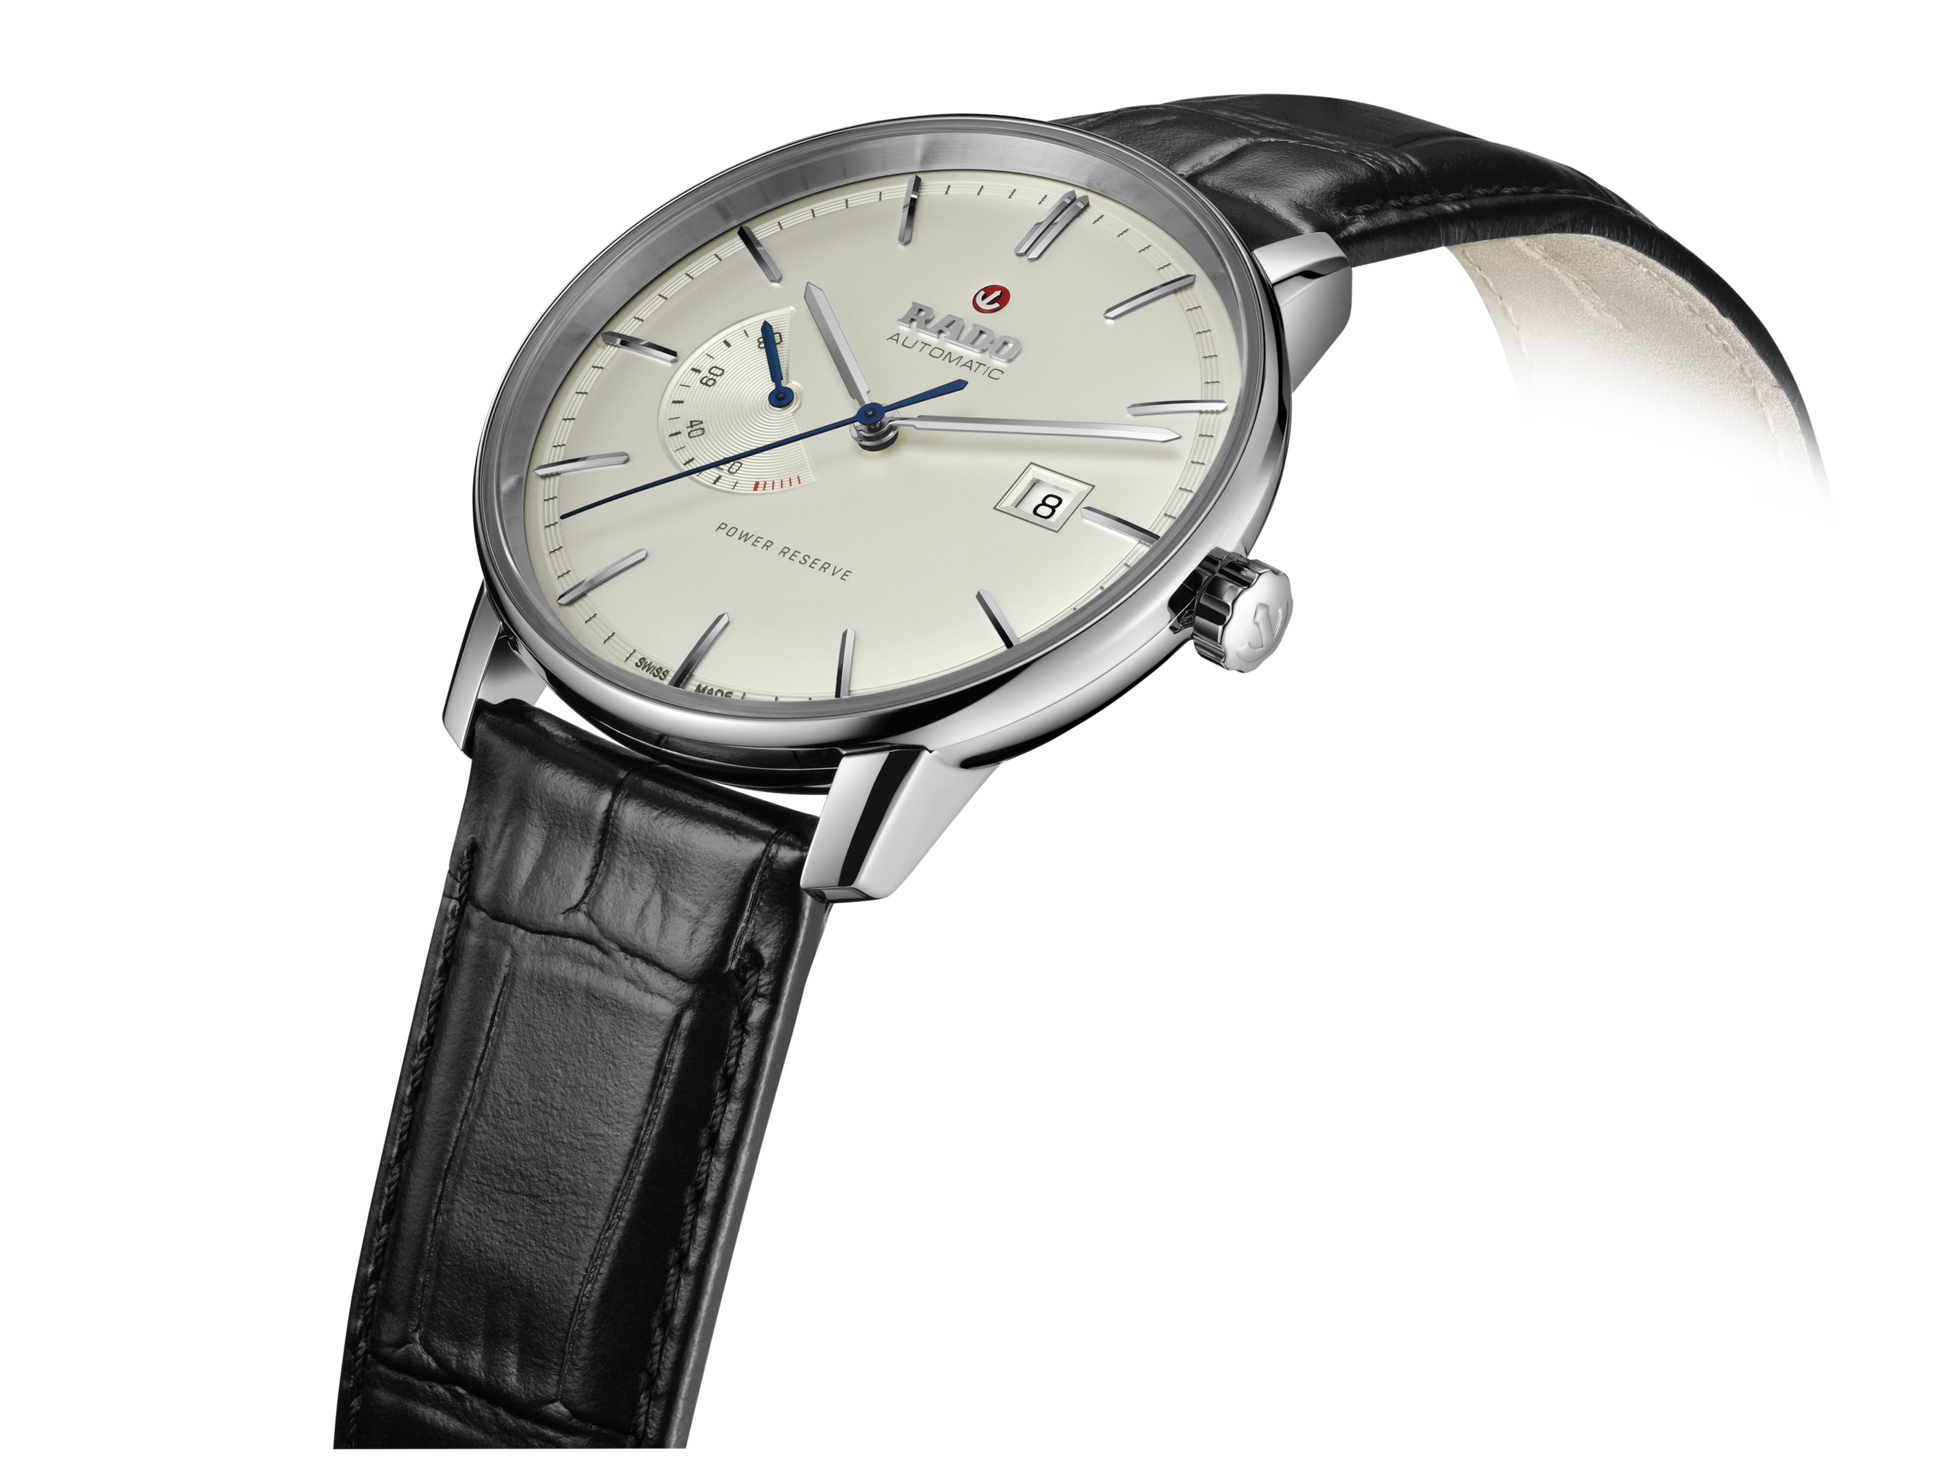 Coupole Classic Automatic Power Reserve White